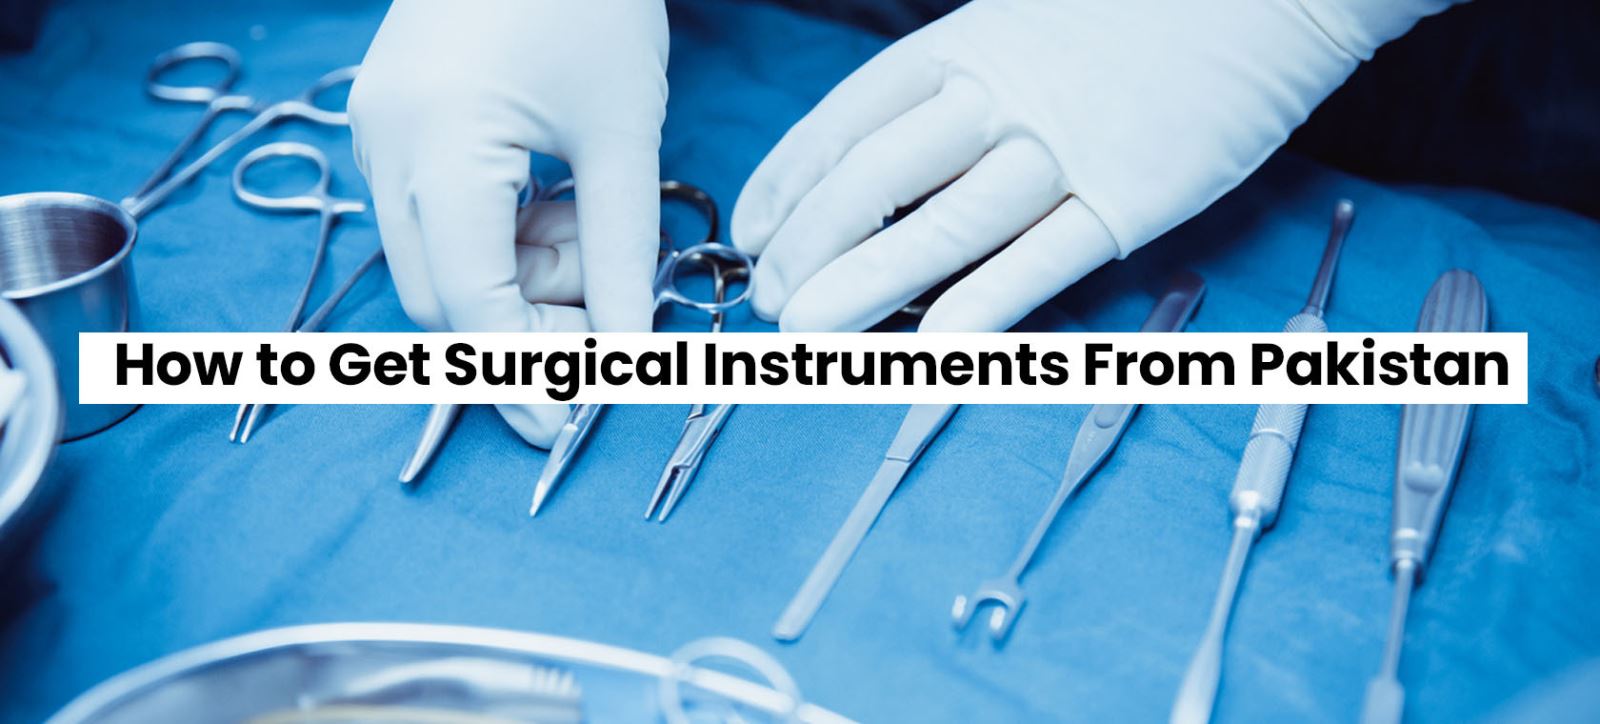 How to Get Surgical Instruments in Pakistan